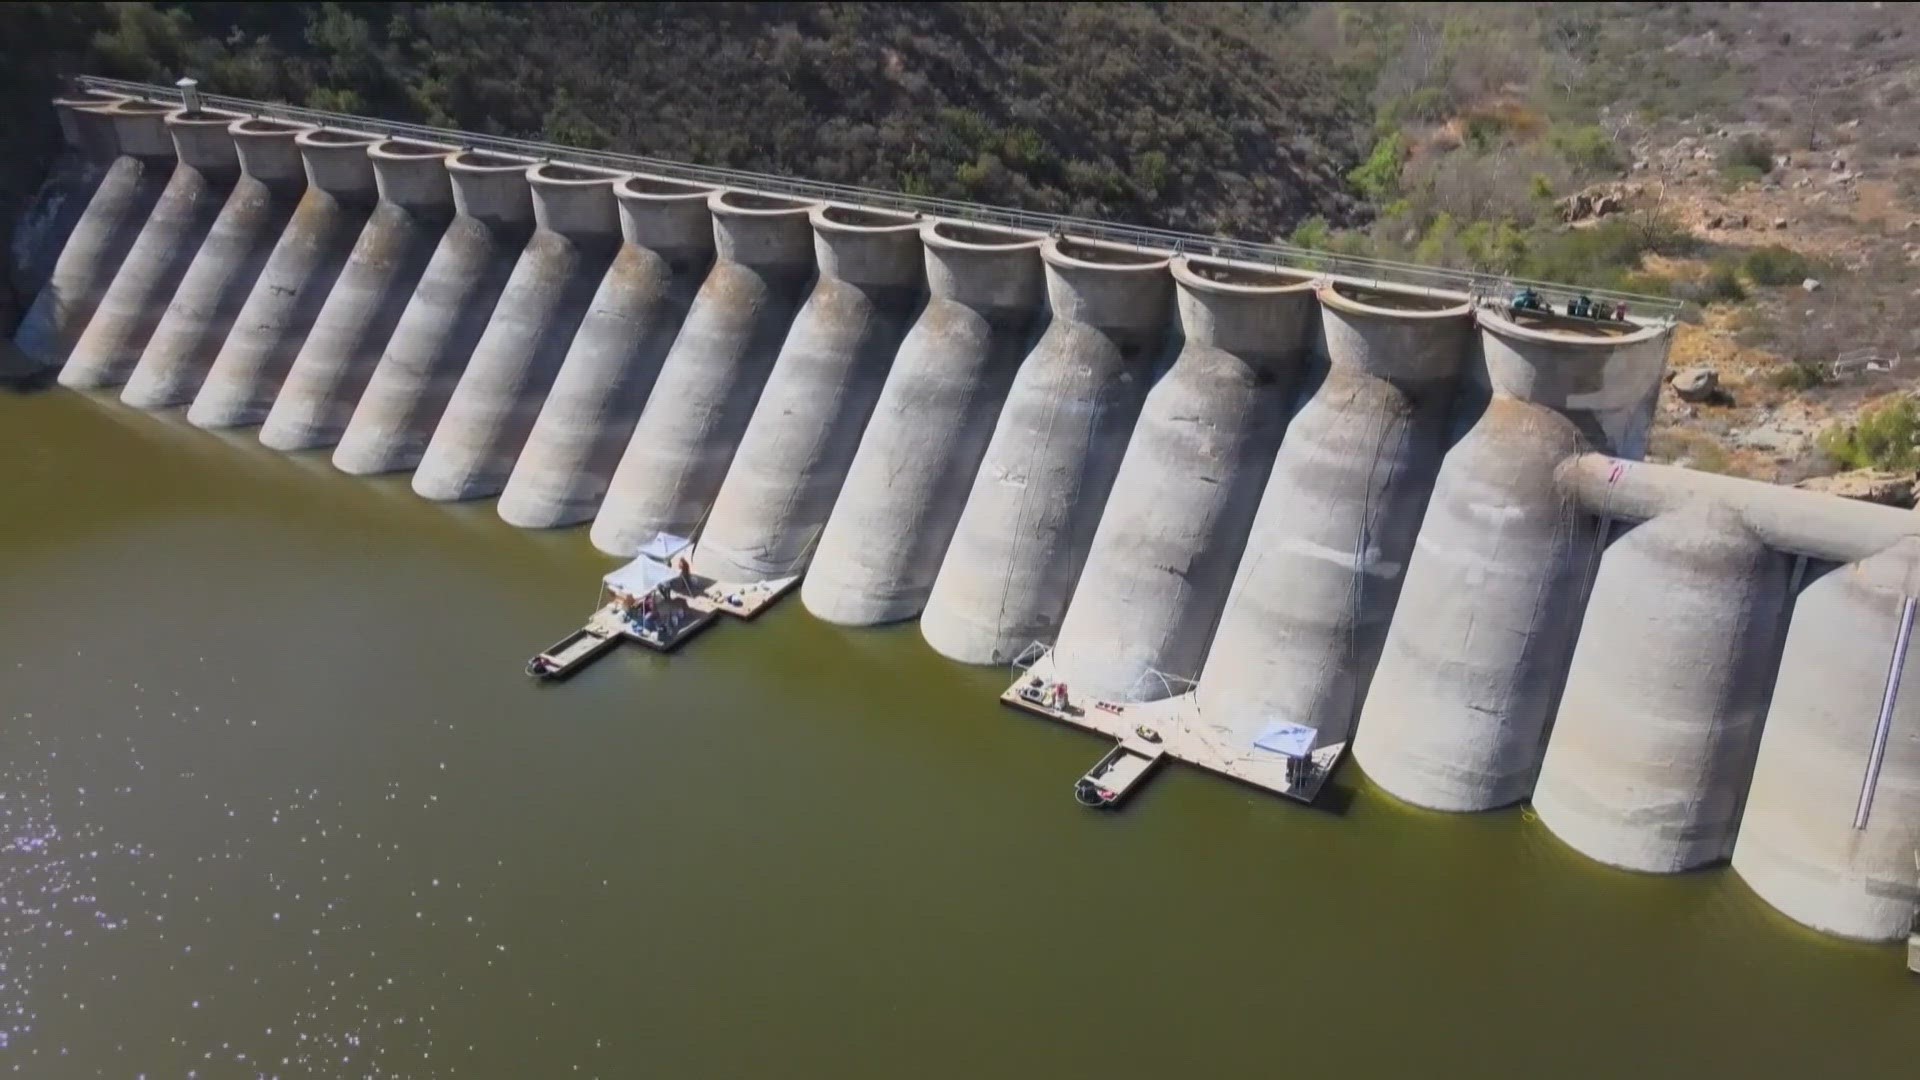 The Santa Fe Irrigation District and San Dieguito Water District filed tort claims over the loss of water due to the condition of the Lake Hodges Dam.